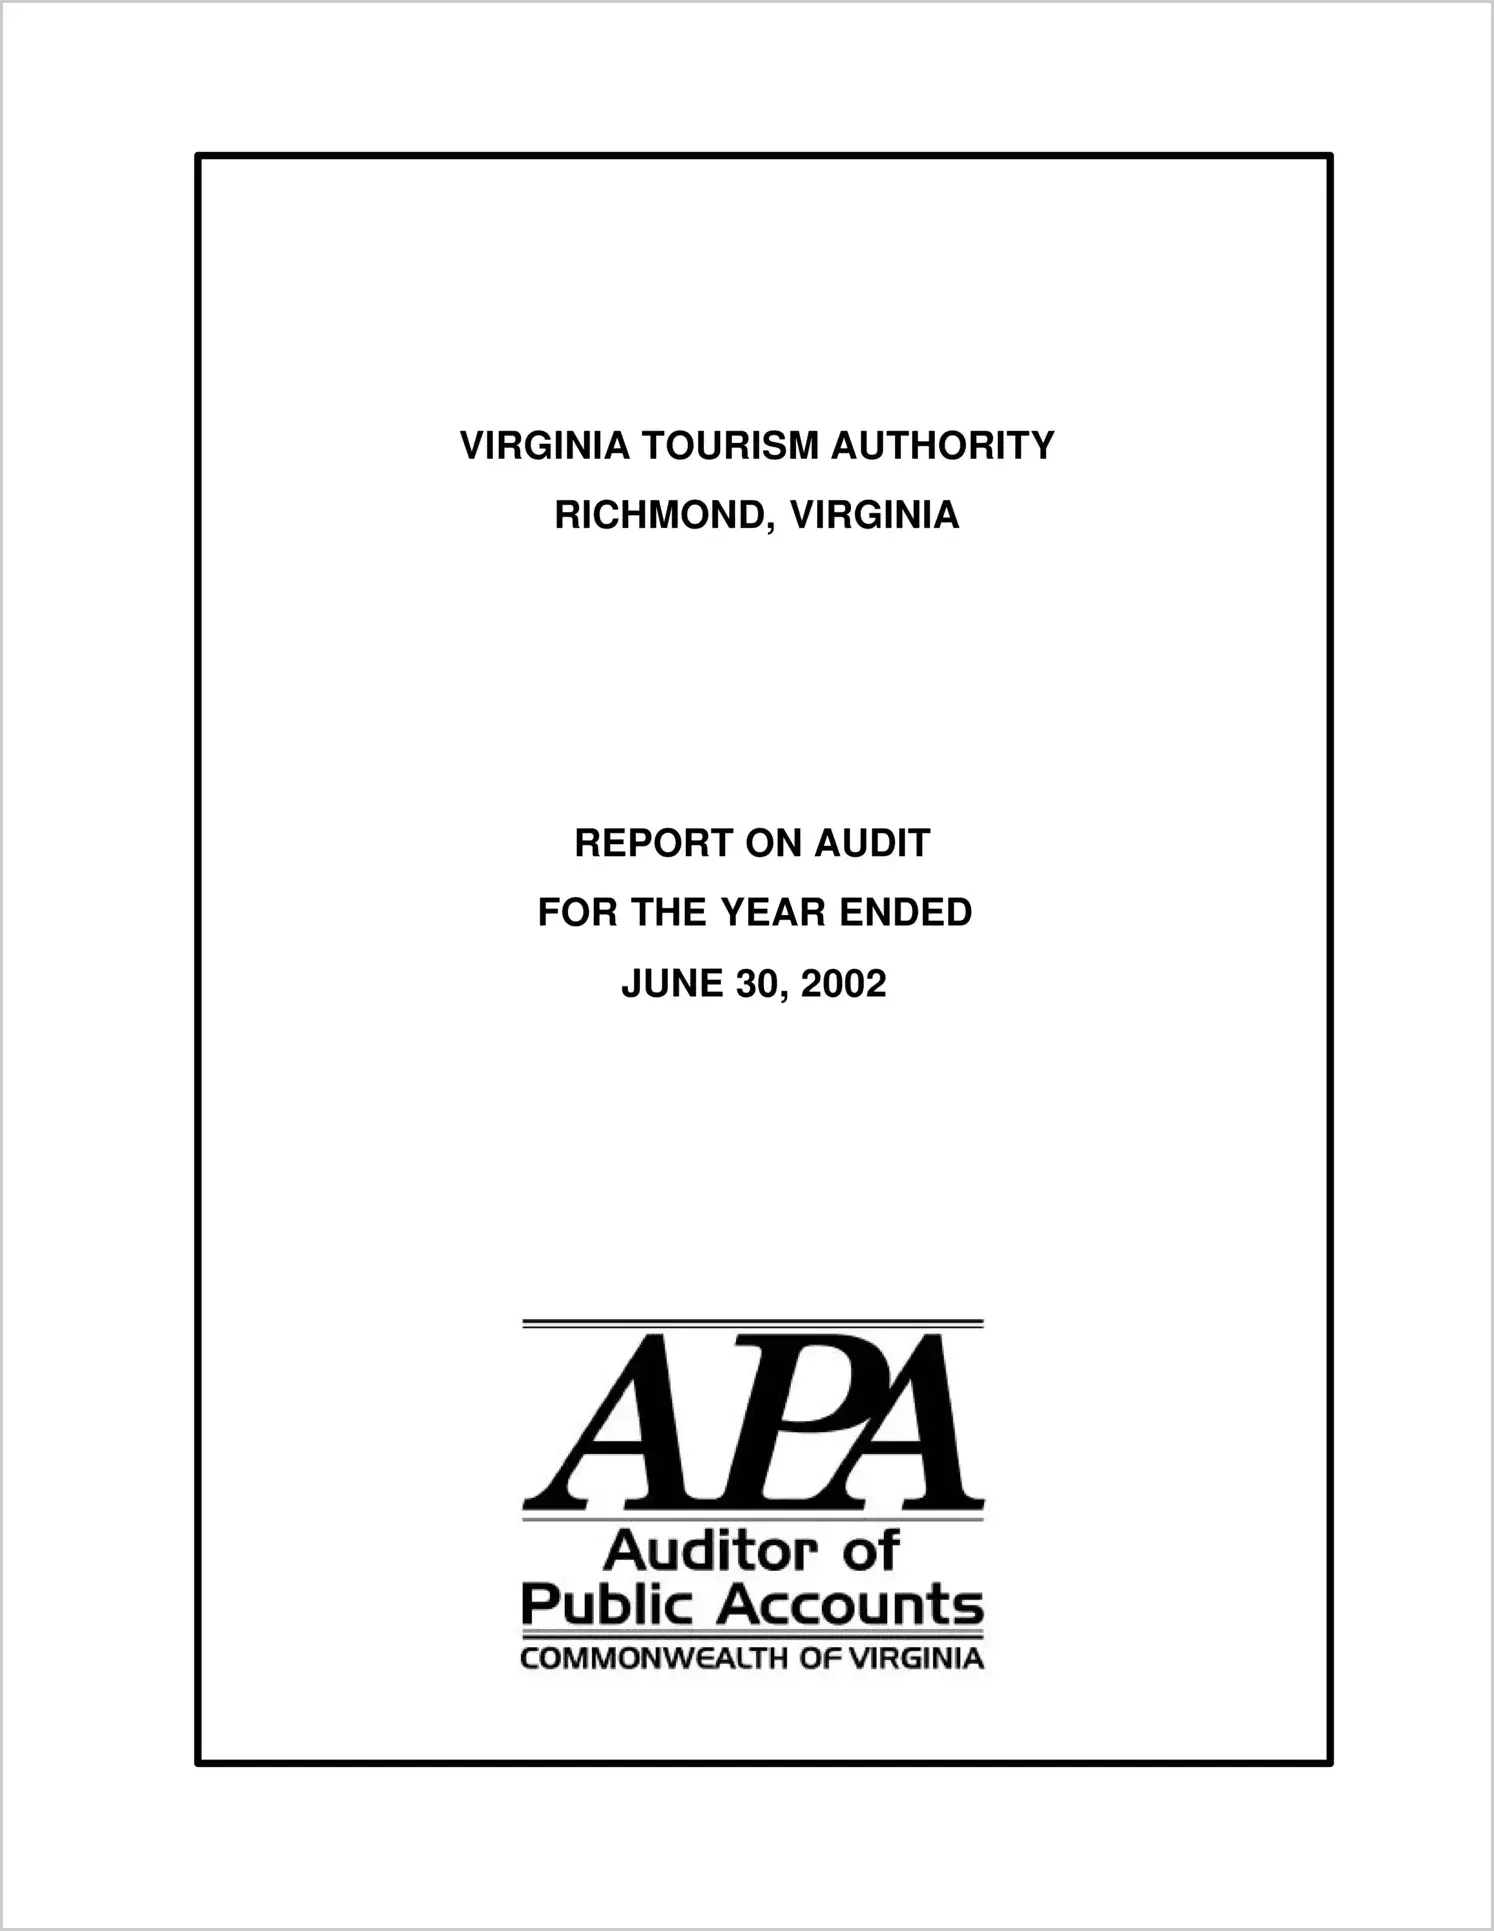 Virginia Tourism Authority for the year ended June 30, 2002